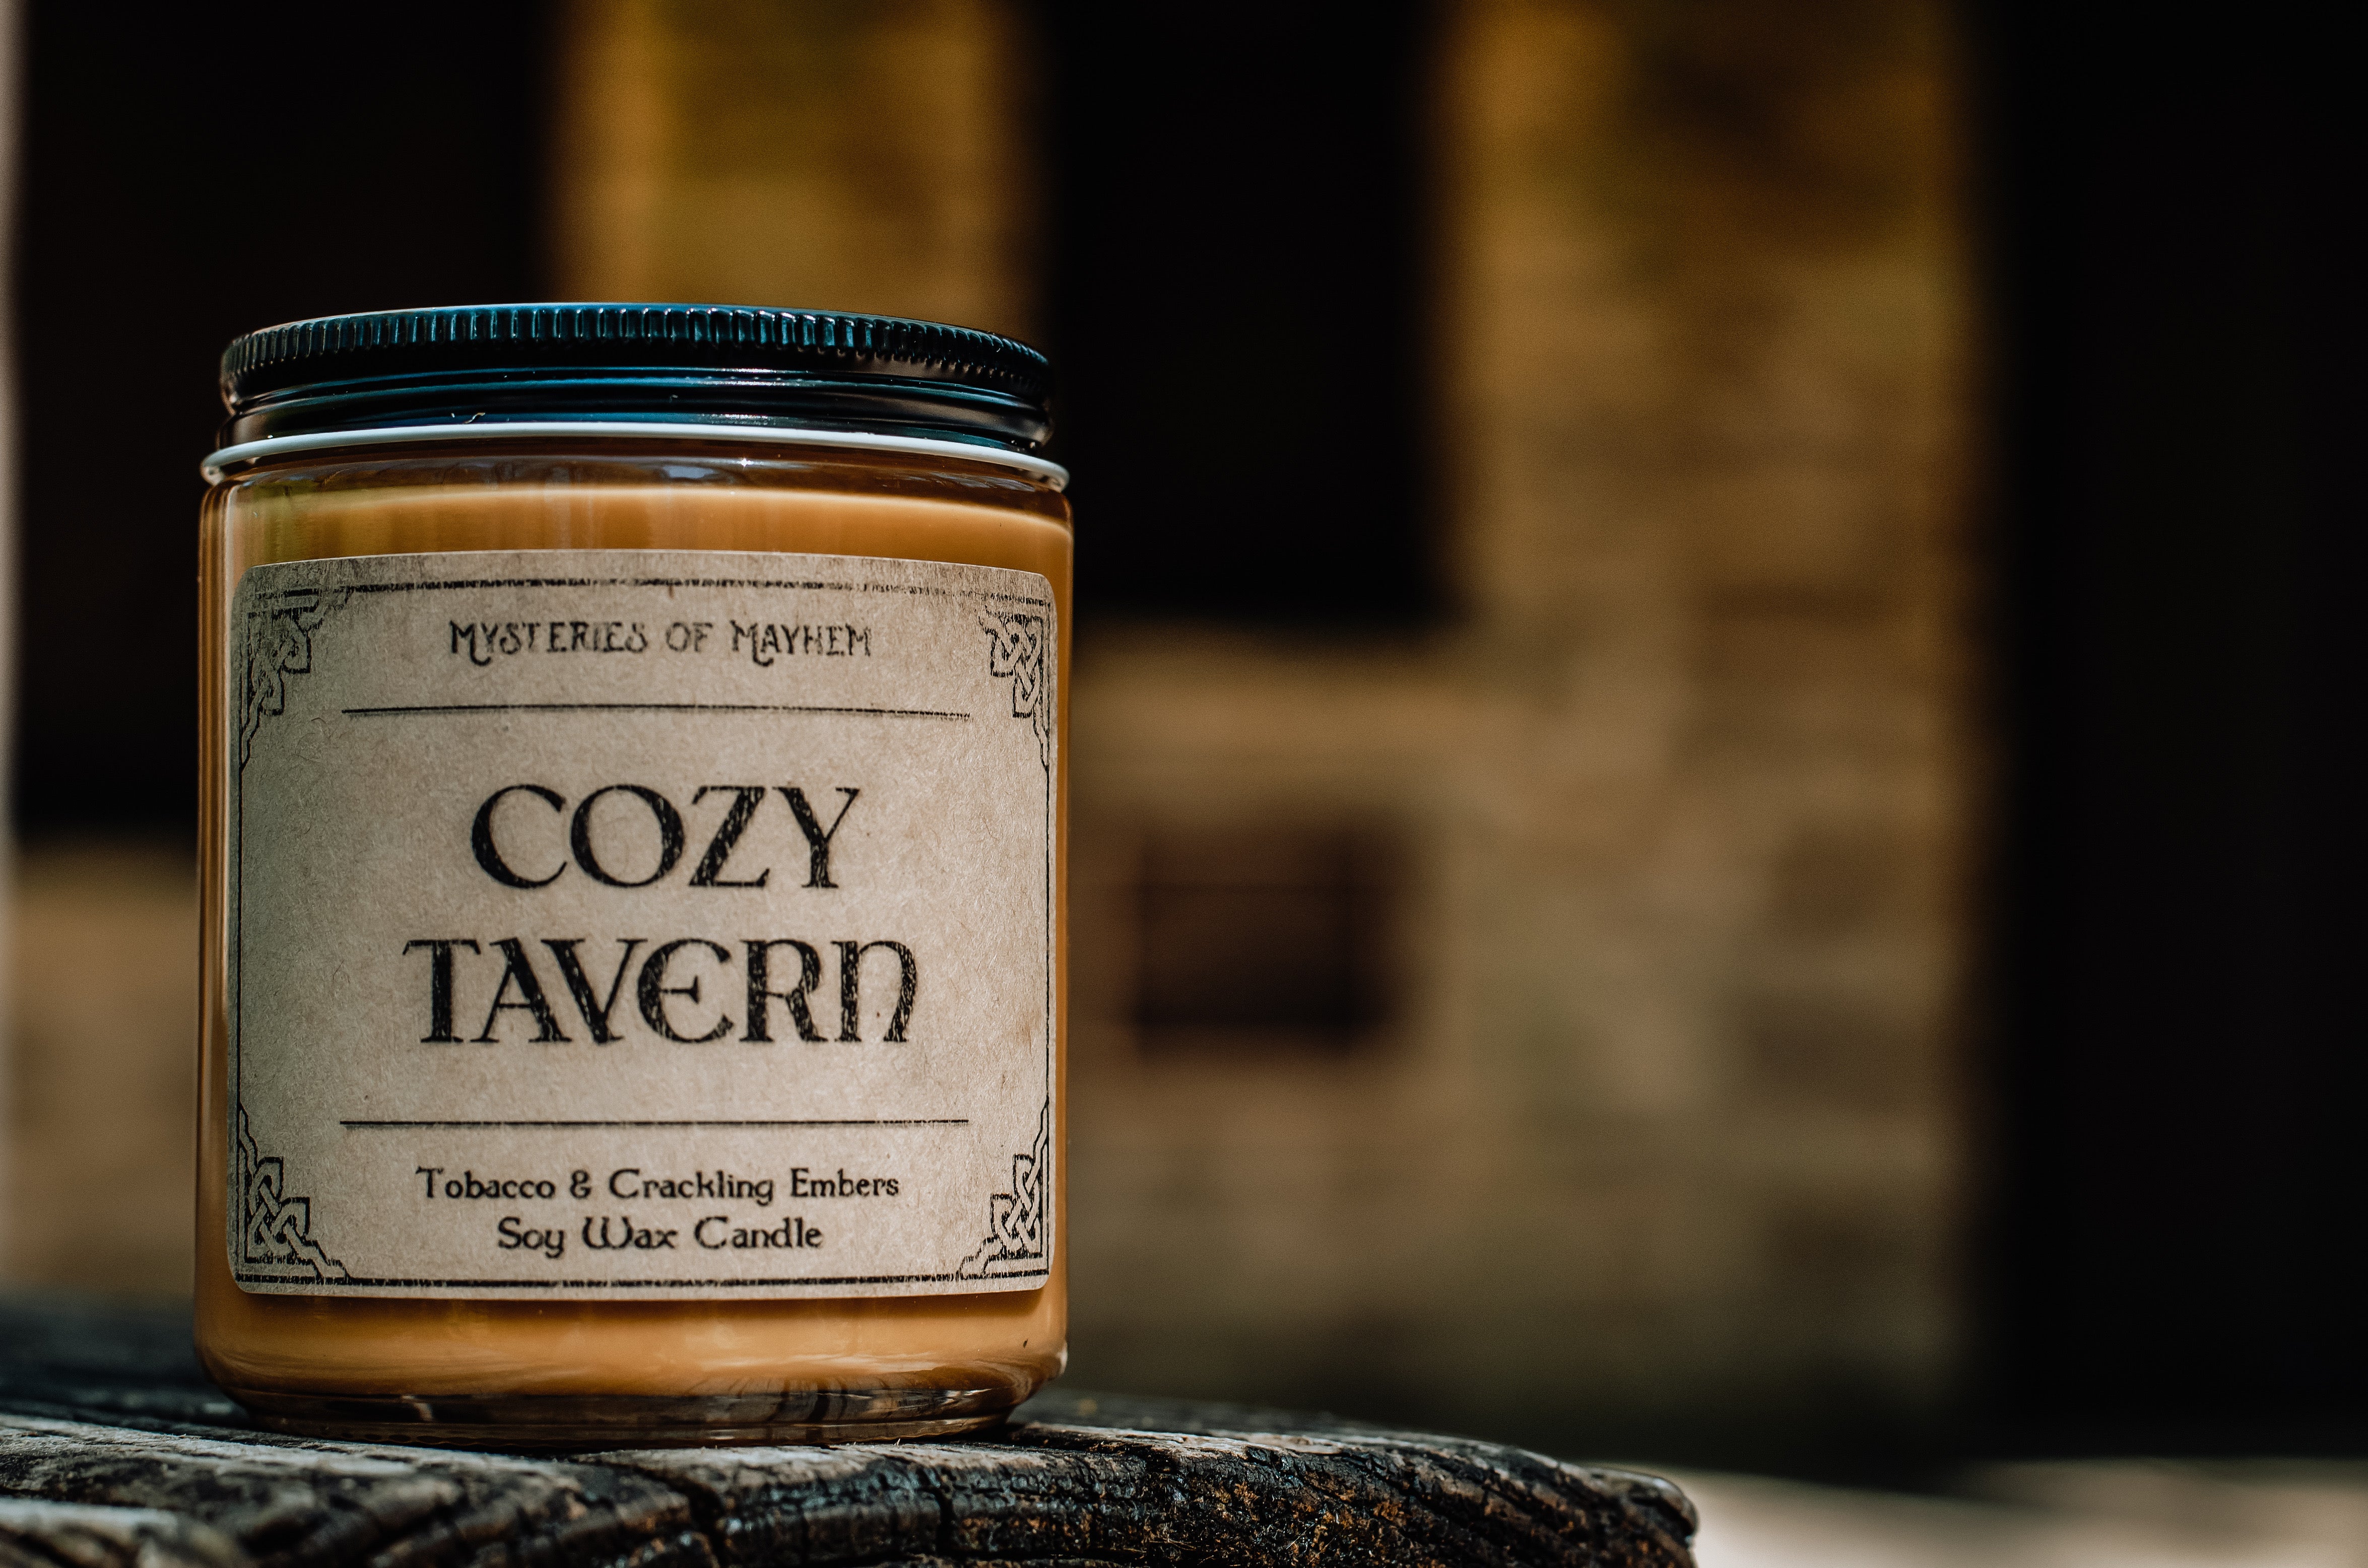 Cozy Tavern - Tobacco and Crackling Embers Scented